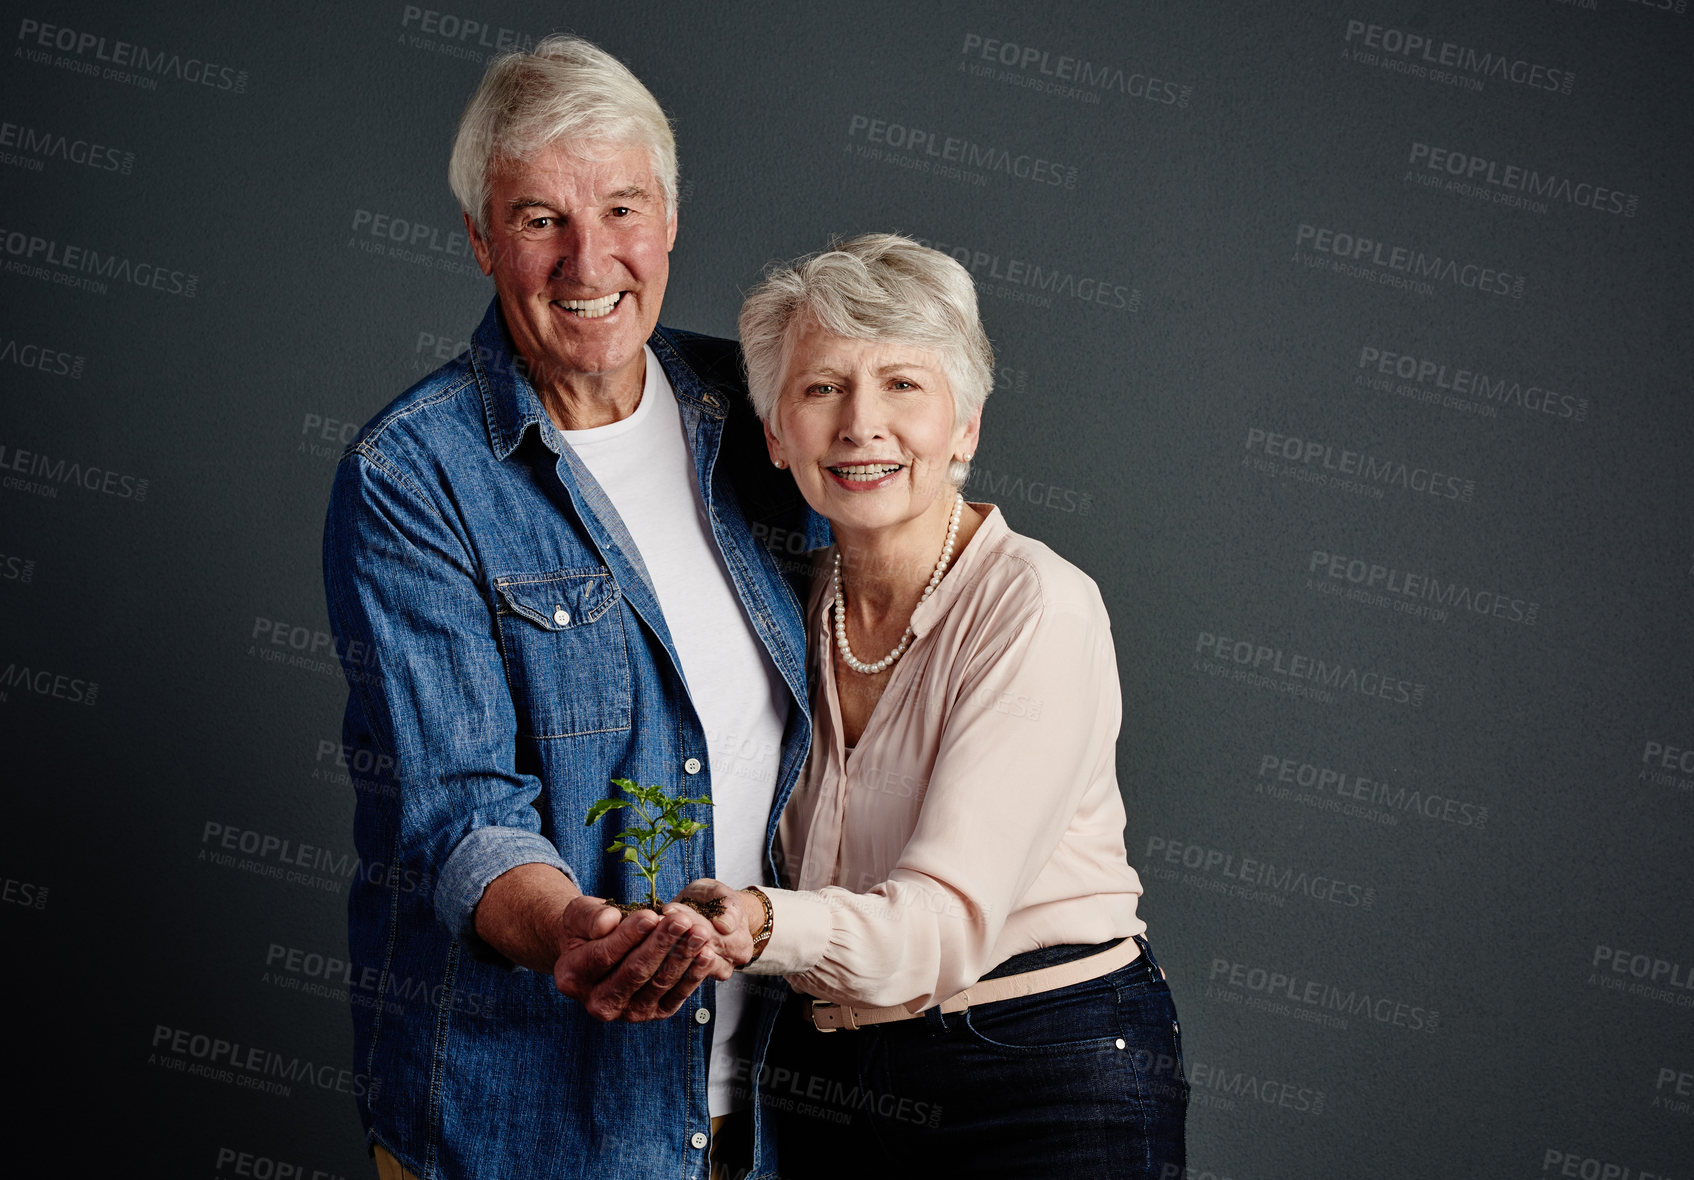 Buy stock photo Studio portrait of an affectionate senior couple holding a budding plant against a grey background